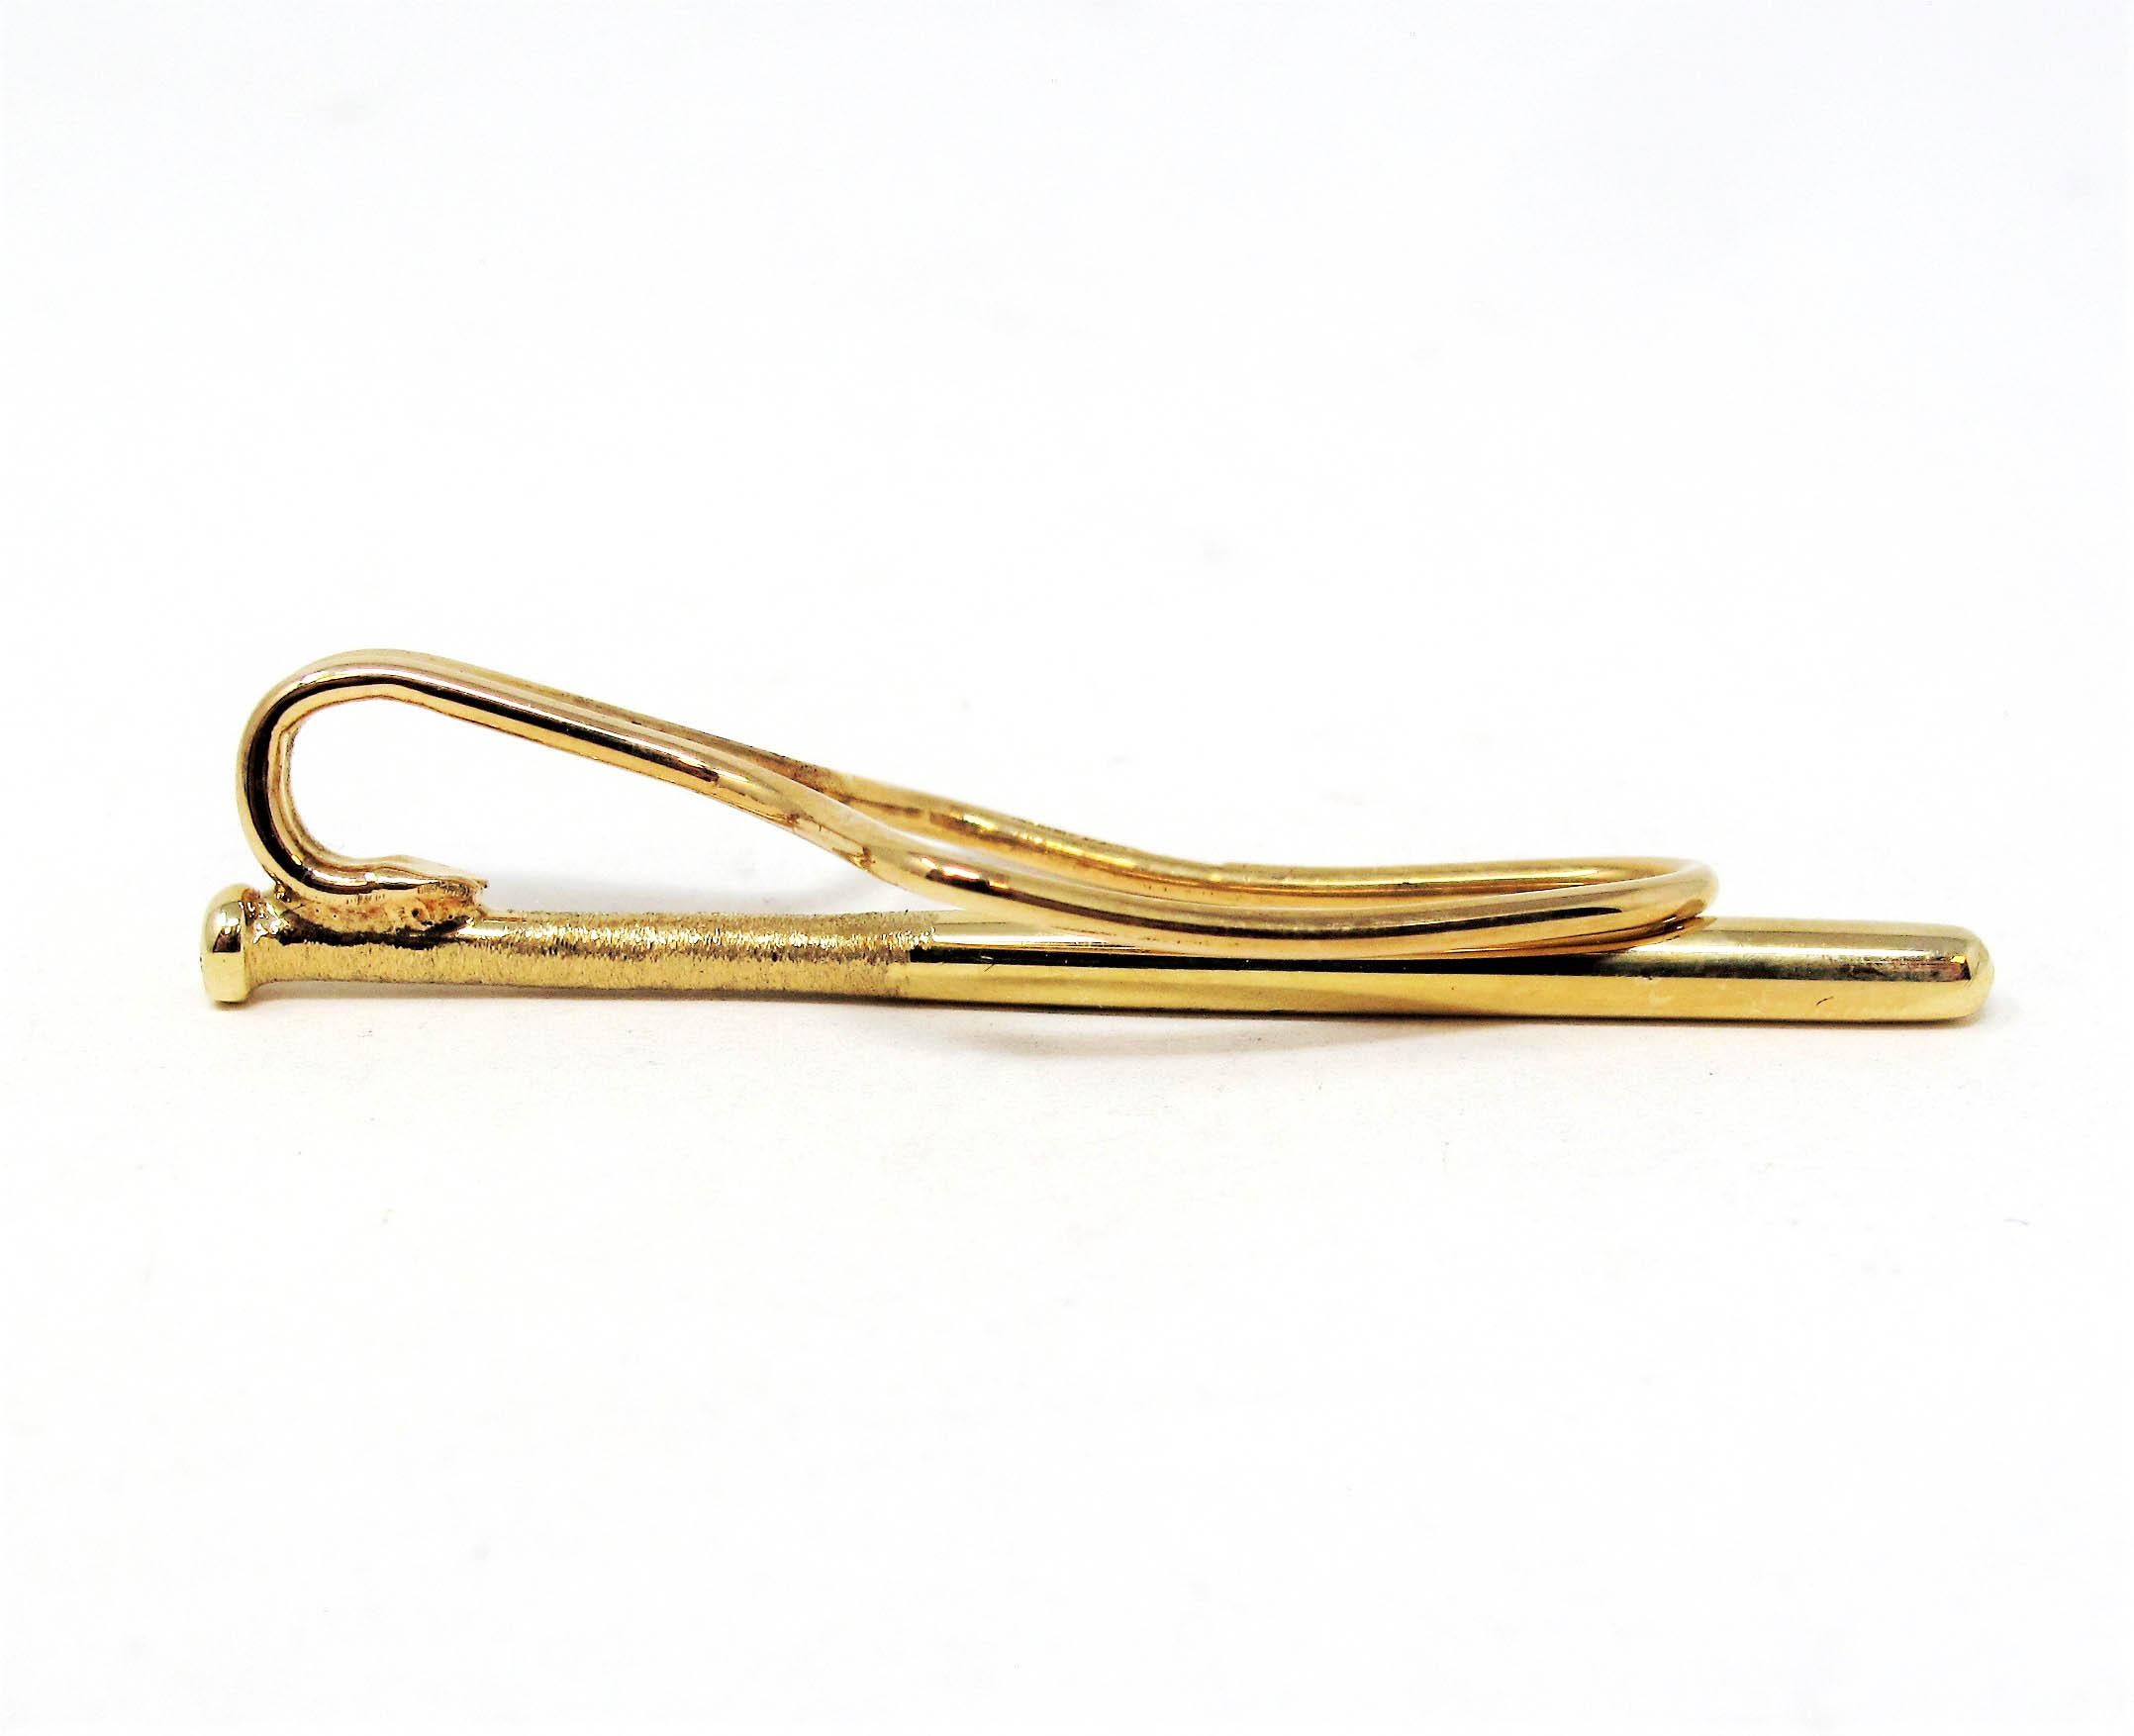 Vintage Tiffany & Co. Baseball Bat Money Clip / Tie Bar 14K Yellow Gold with Box In Good Condition For Sale In Scottsdale, AZ